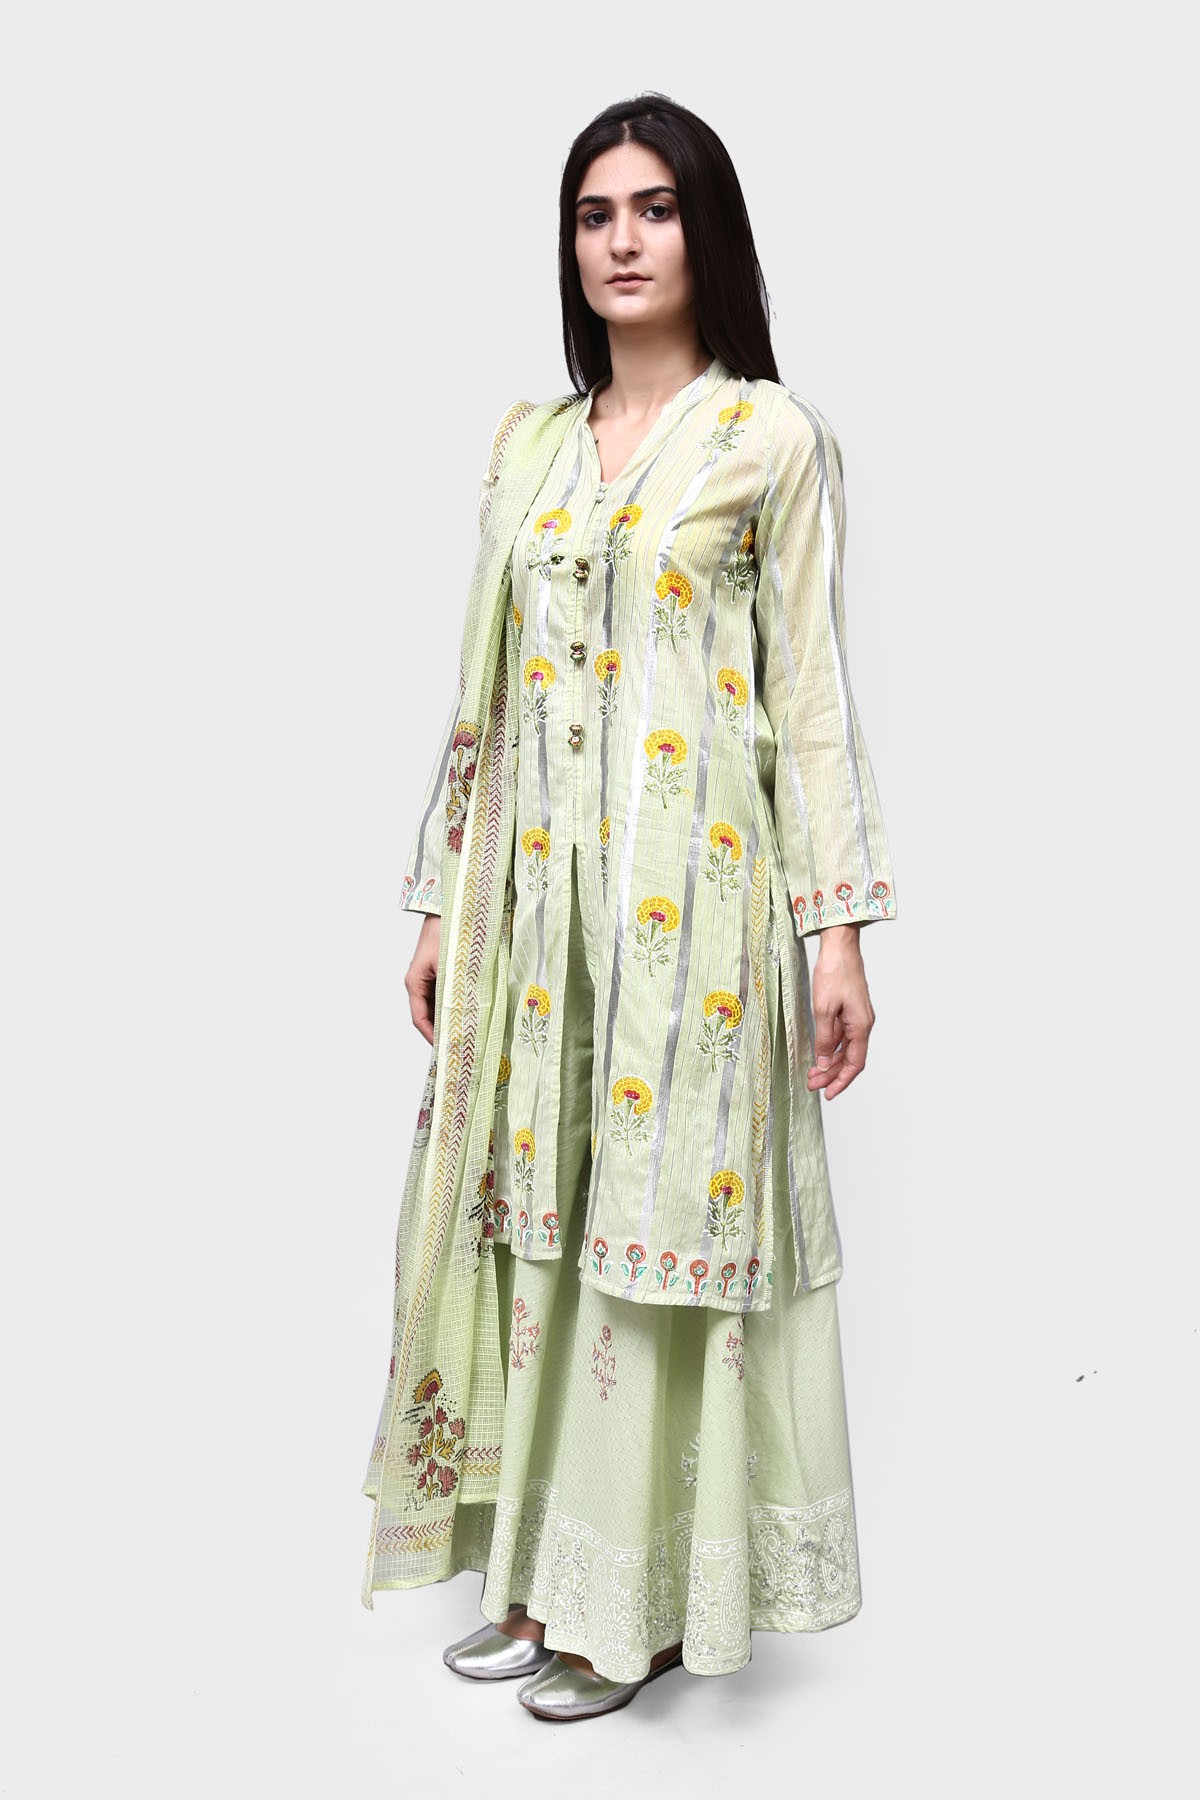 Pastel green vintage glore ready to wear dress by Generation part wear collection 2019